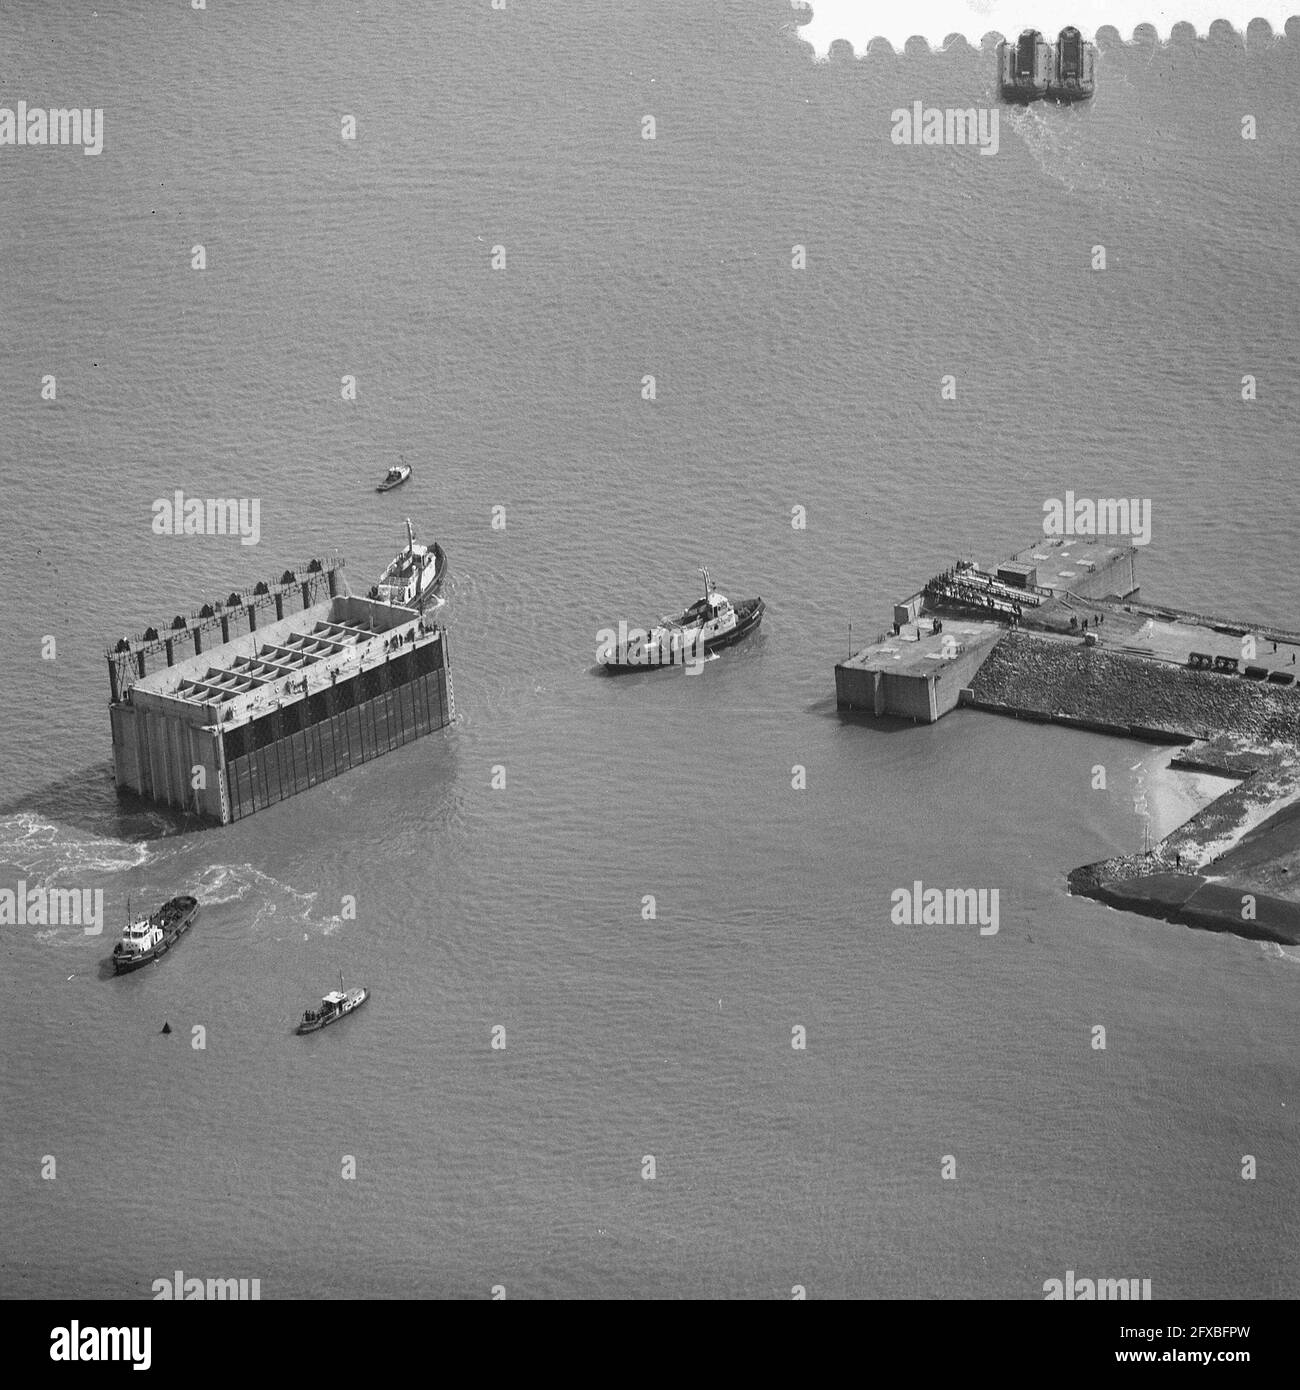 Boring of caissons in the Veerse Gat . Aerial photographs, April 13 1961, CAISSONS, The Netherlands, 20th century press agency photo, news to remember, documentary, historic photography 1945-1990, visual stories, human history of the Twentieth Century, capturing moments in time Stock Photo